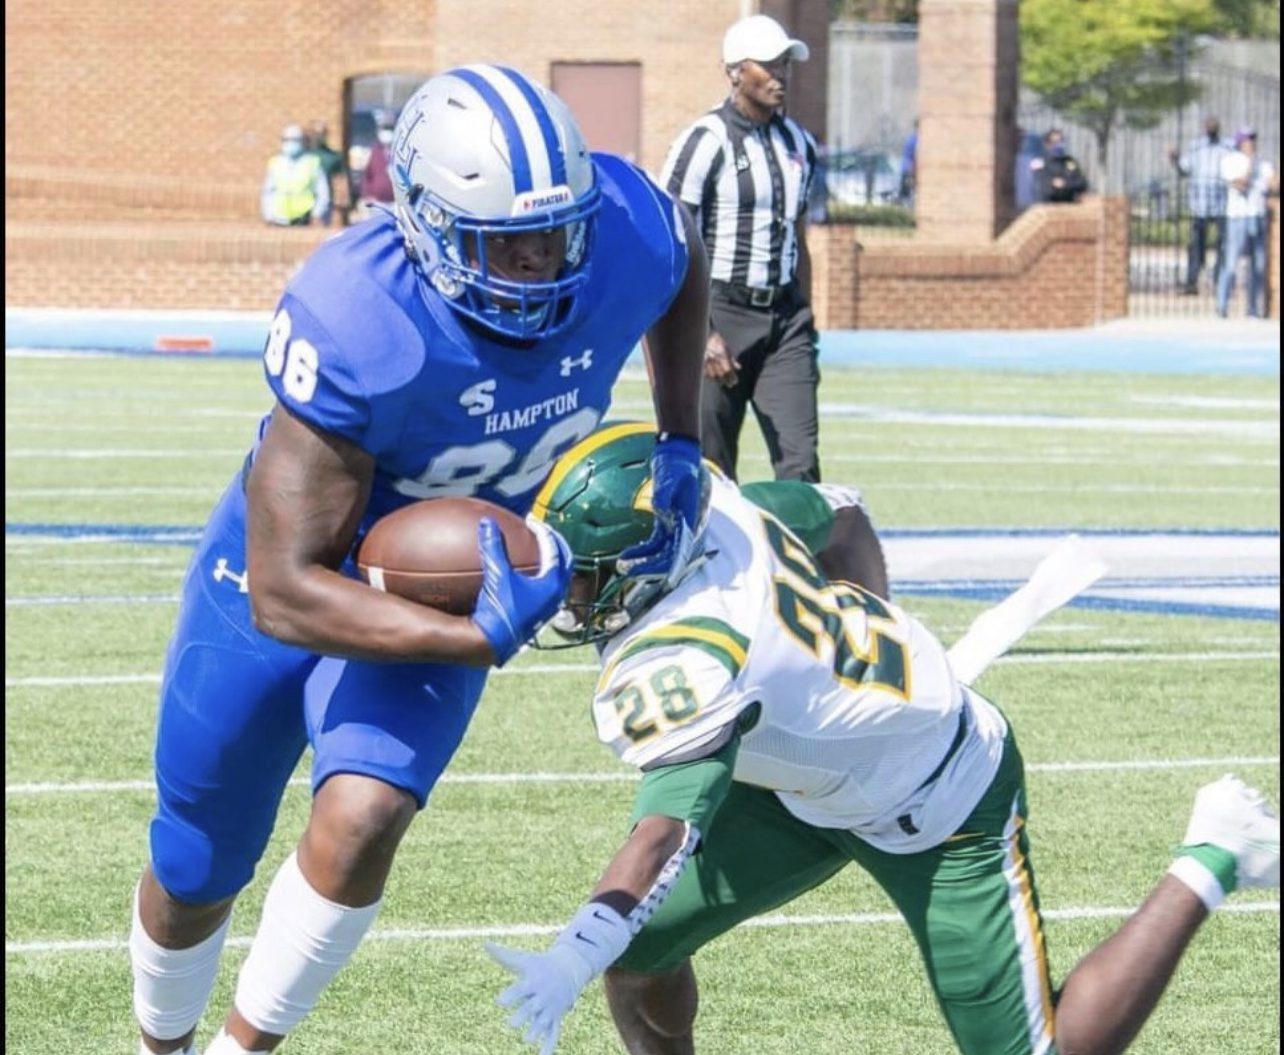 James Stanley Jr the strong tight end from Hampton University recently sat down with NFL Draft Diamonds writer Justin Berendzen.